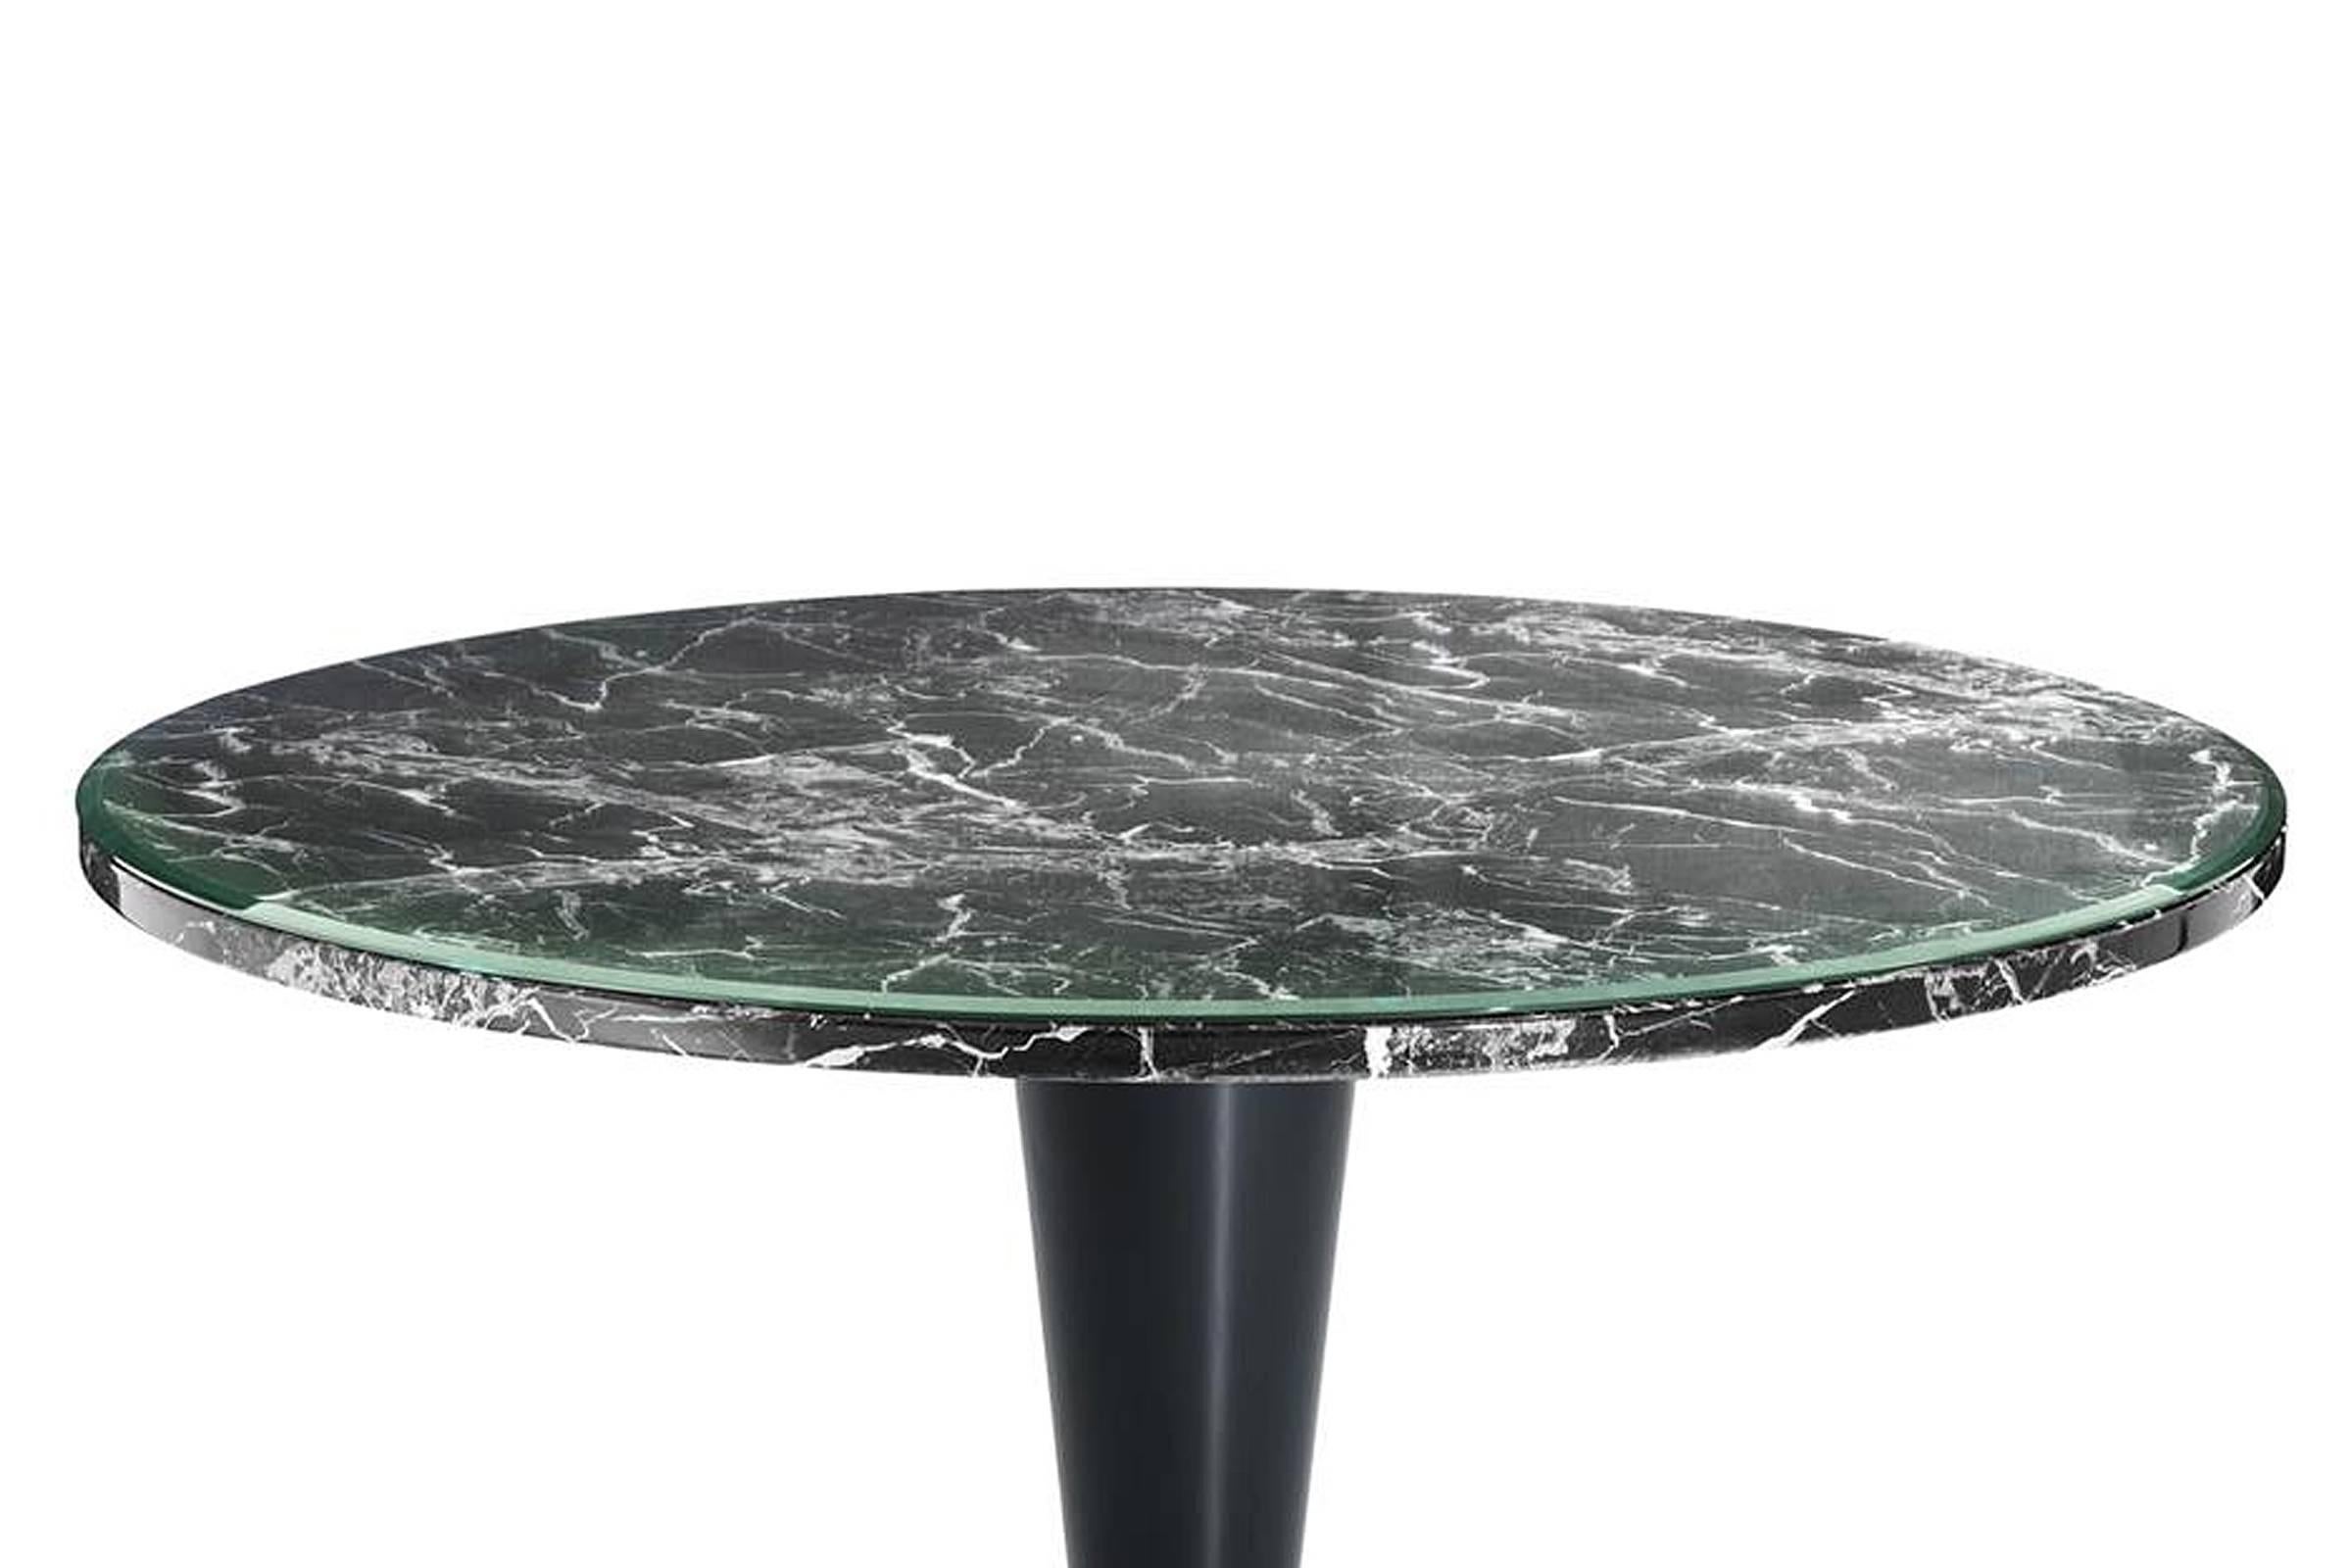 Round dining table Bridget with resin marble top.
Bevelled clear glass top. Black and gold paint on
base. 